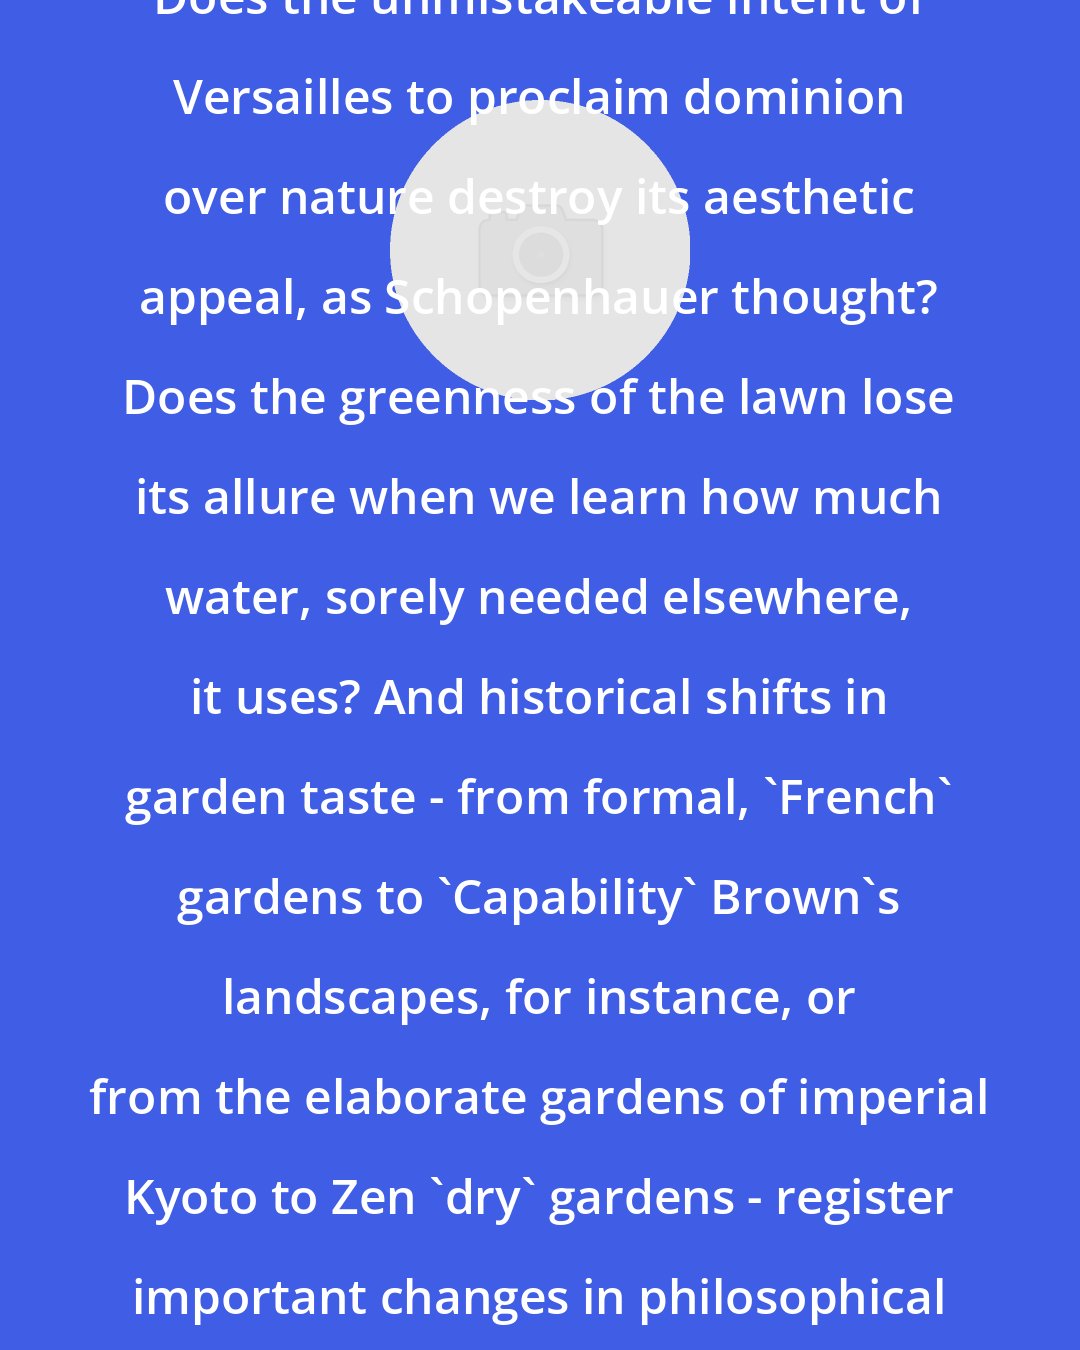 David E. Cooper: Does the unmistakeable intent of Versailles to proclaim dominion over nature destroy its aesthetic appeal, as Schopenhauer thought? Does the greenness of the lawn lose its allure when we learn how much water, sorely needed elsewhere, it uses? And historical shifts in garden taste - from formal, 'French' gardens to 'Capability' Brown's landscapes, for instance, or from the elaborate gardens of imperial Kyoto to Zen 'dry' gardens - register important changes in philosophical or religious attitudes.